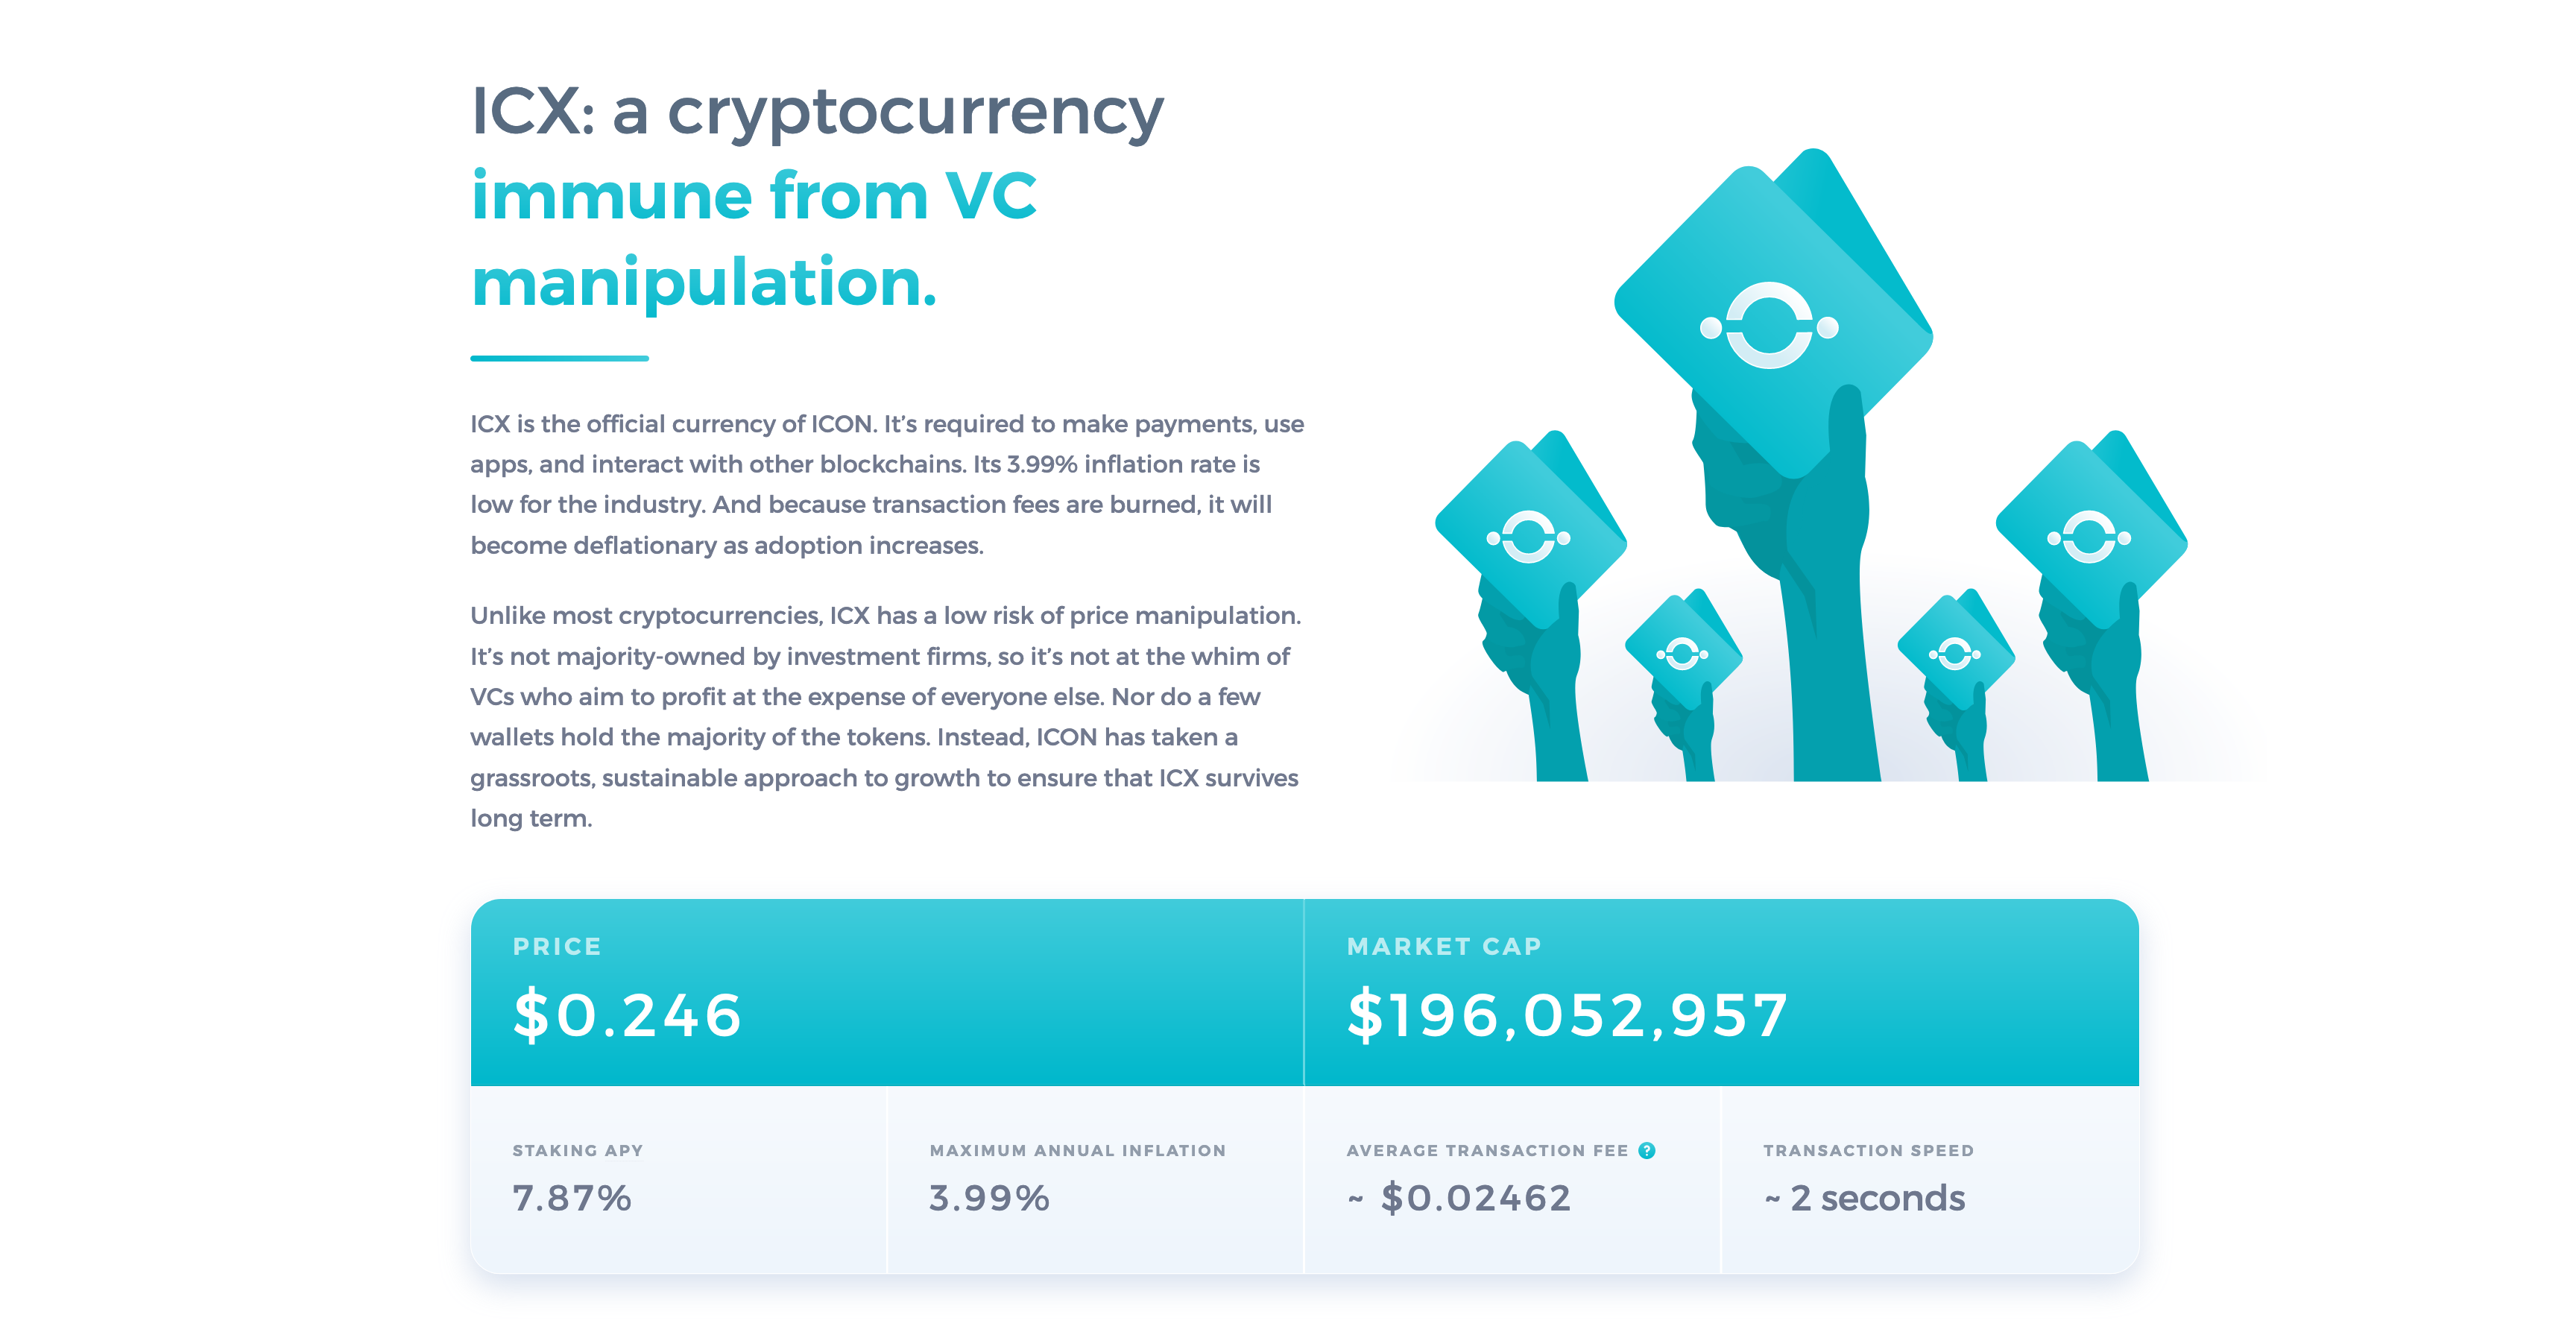 The ICX section on whyicx.com.  ICX: a cryptocurrency immune from VC manipulation.  ICX is the official currency of ICON. It’s required to make payments, use apps, and interact with other blockchains. Its 3.99% inflation rate is low for the industry. And because transaction fees are burned, it will become deflationary as adoption increases.  Unlike most cryptocurrencies, ICX has a low risk of price manipulation. It’s not majority-owned by investment firms, so it’s not at the whim of VCs who aim to profit at the expense of everyone else. Nor do a few wallets hold the majority of the tokens. Instead, ICON has taken a grassroots, sustainable approach to growth to ensure that ICX survives long term.